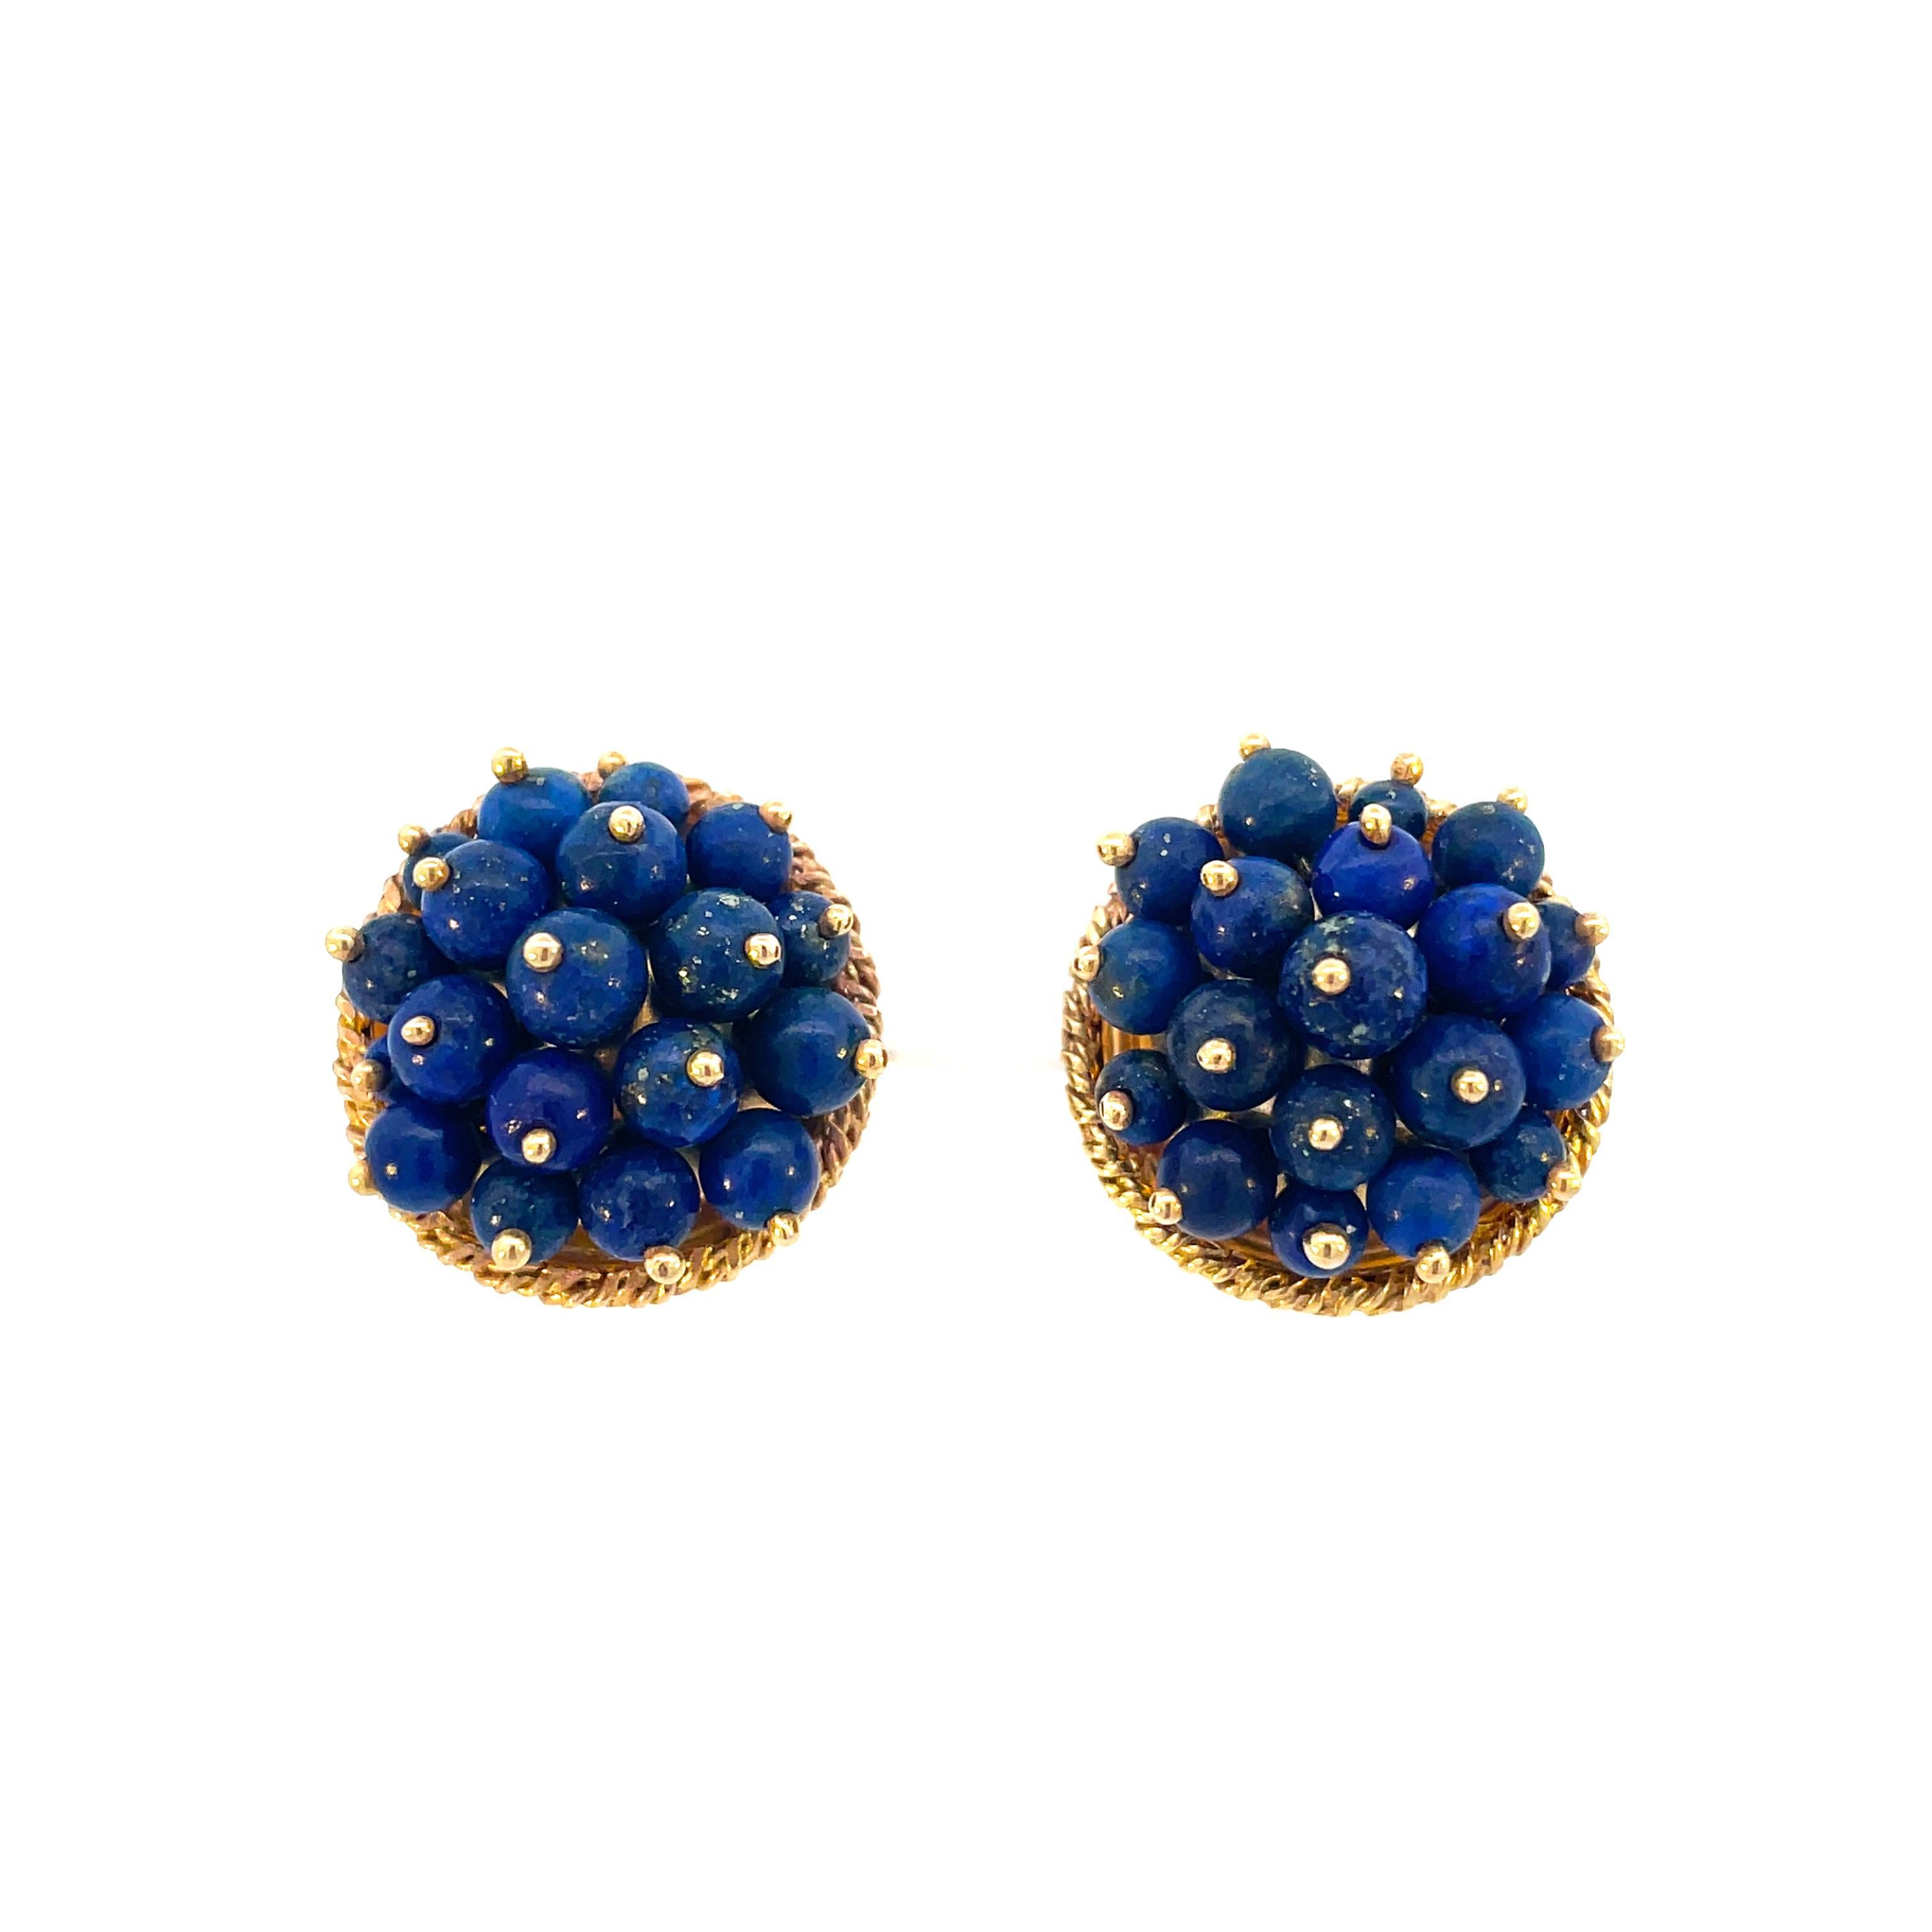 This is a wonderful pair of vintage lever-back earrings, dating to the 1960s, crafted in beaming 14K yellow gold that showcases a collection of vivid blue Lapis beads! These earrings are the perfect pop of color for any outfit for any occasion. The